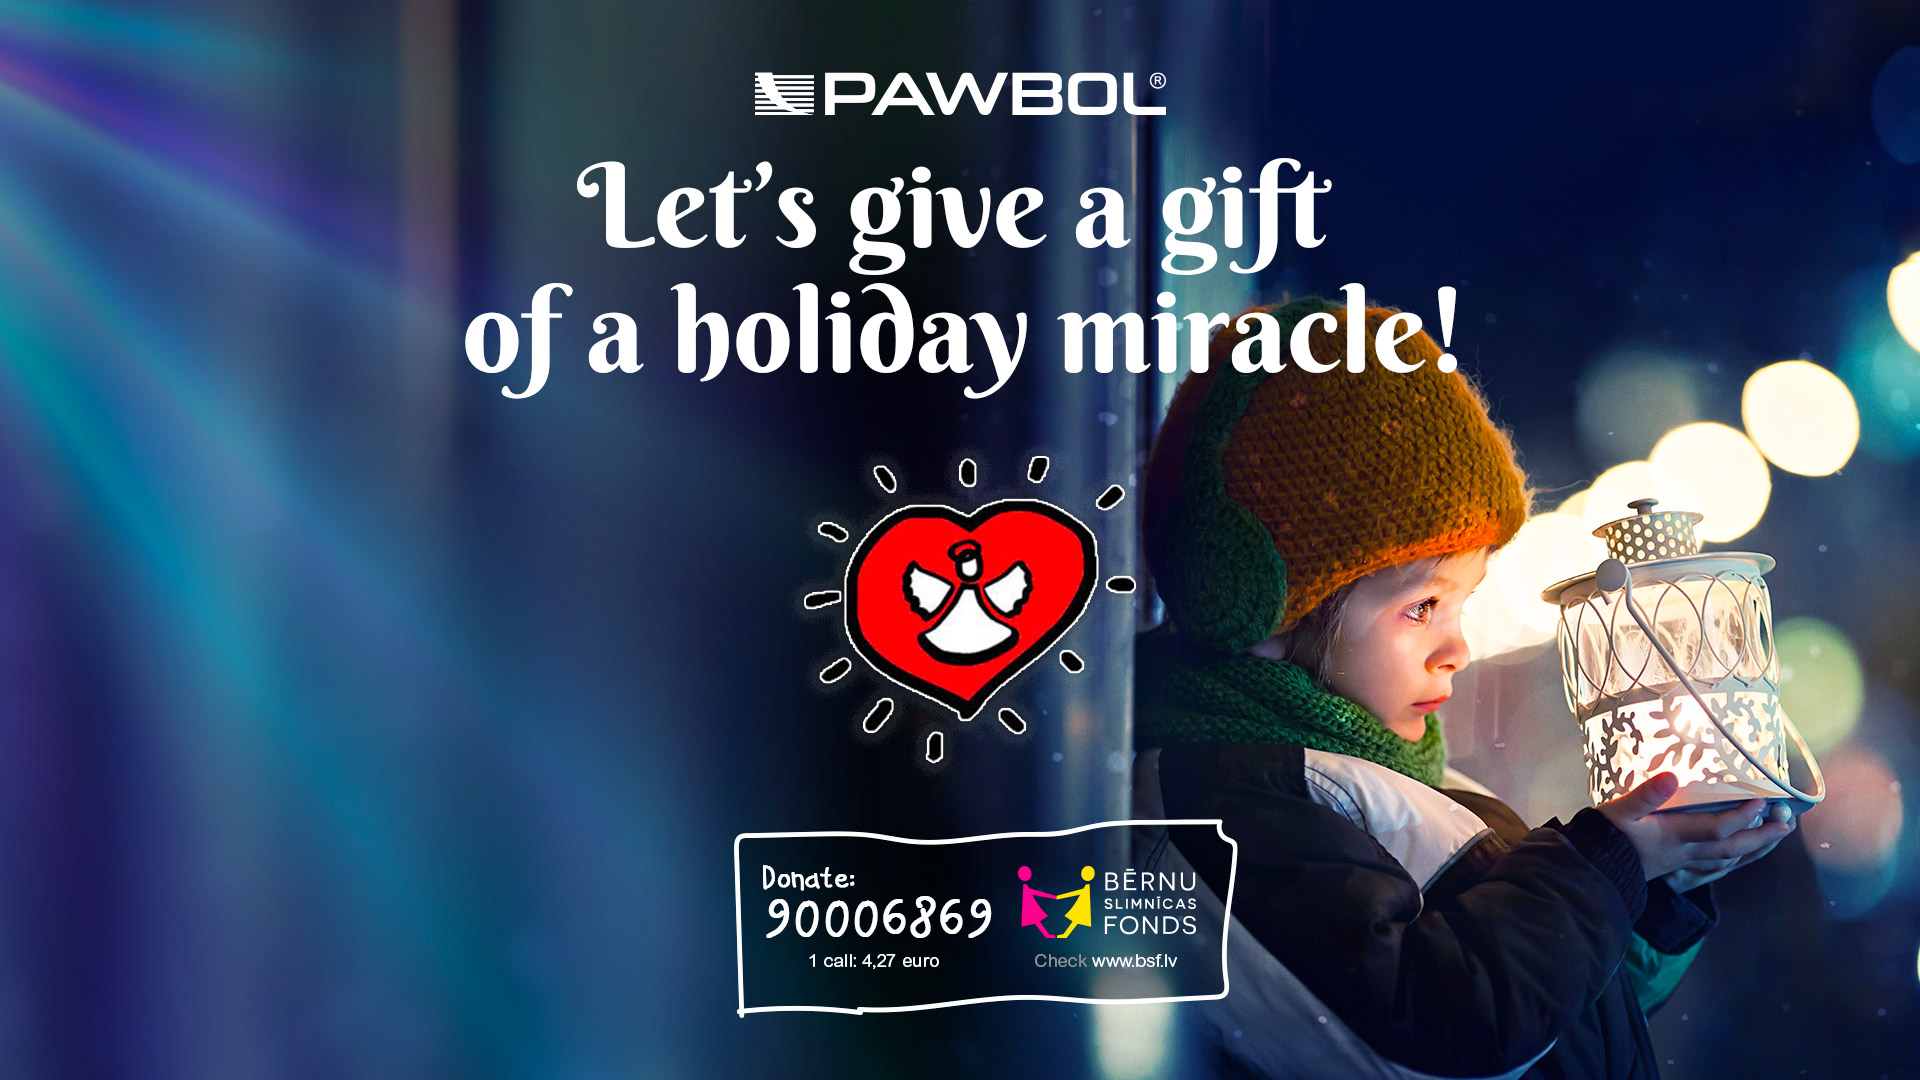 Let’s give a gift of a holiday miracle!